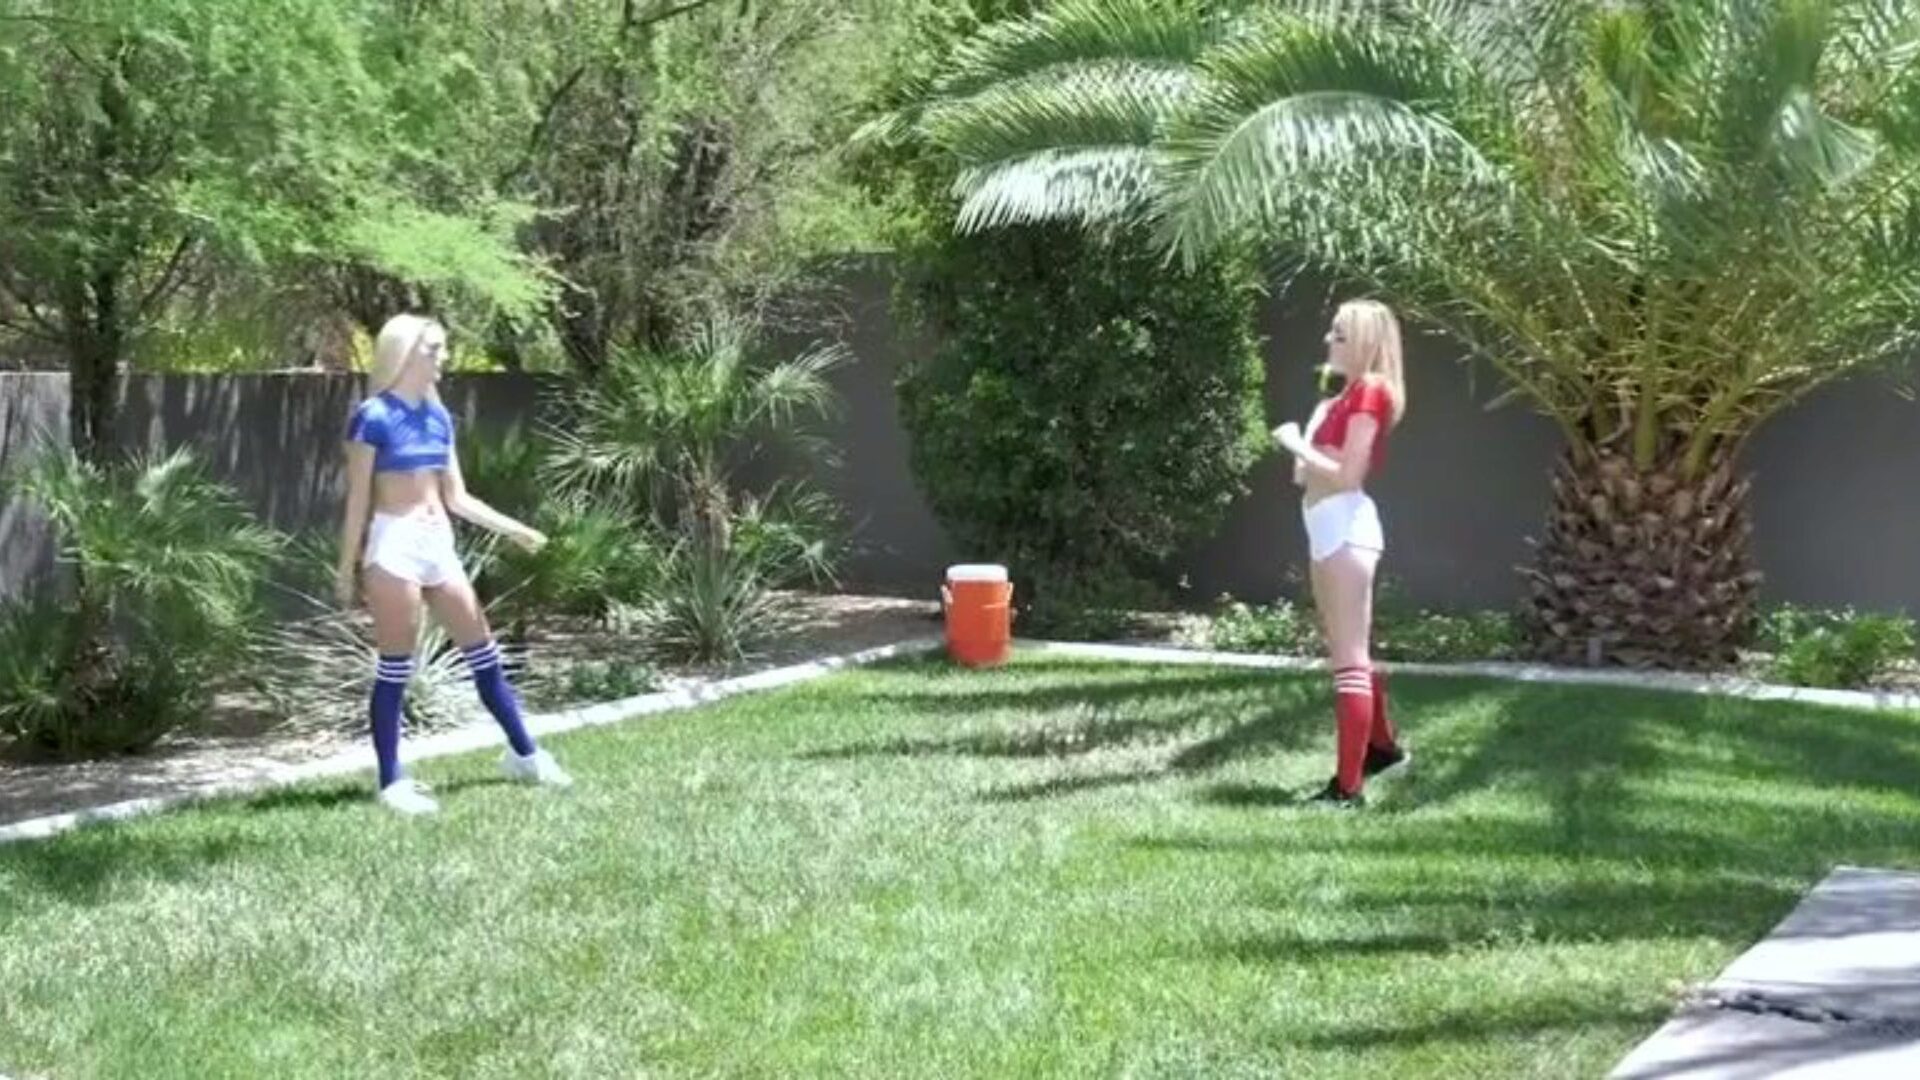 Come and Play With Us! 2 slender stepsisters determined to go out and have fun some football beneath the sexy summer sun! But their nosy step-dad desired to join! Will they let him however